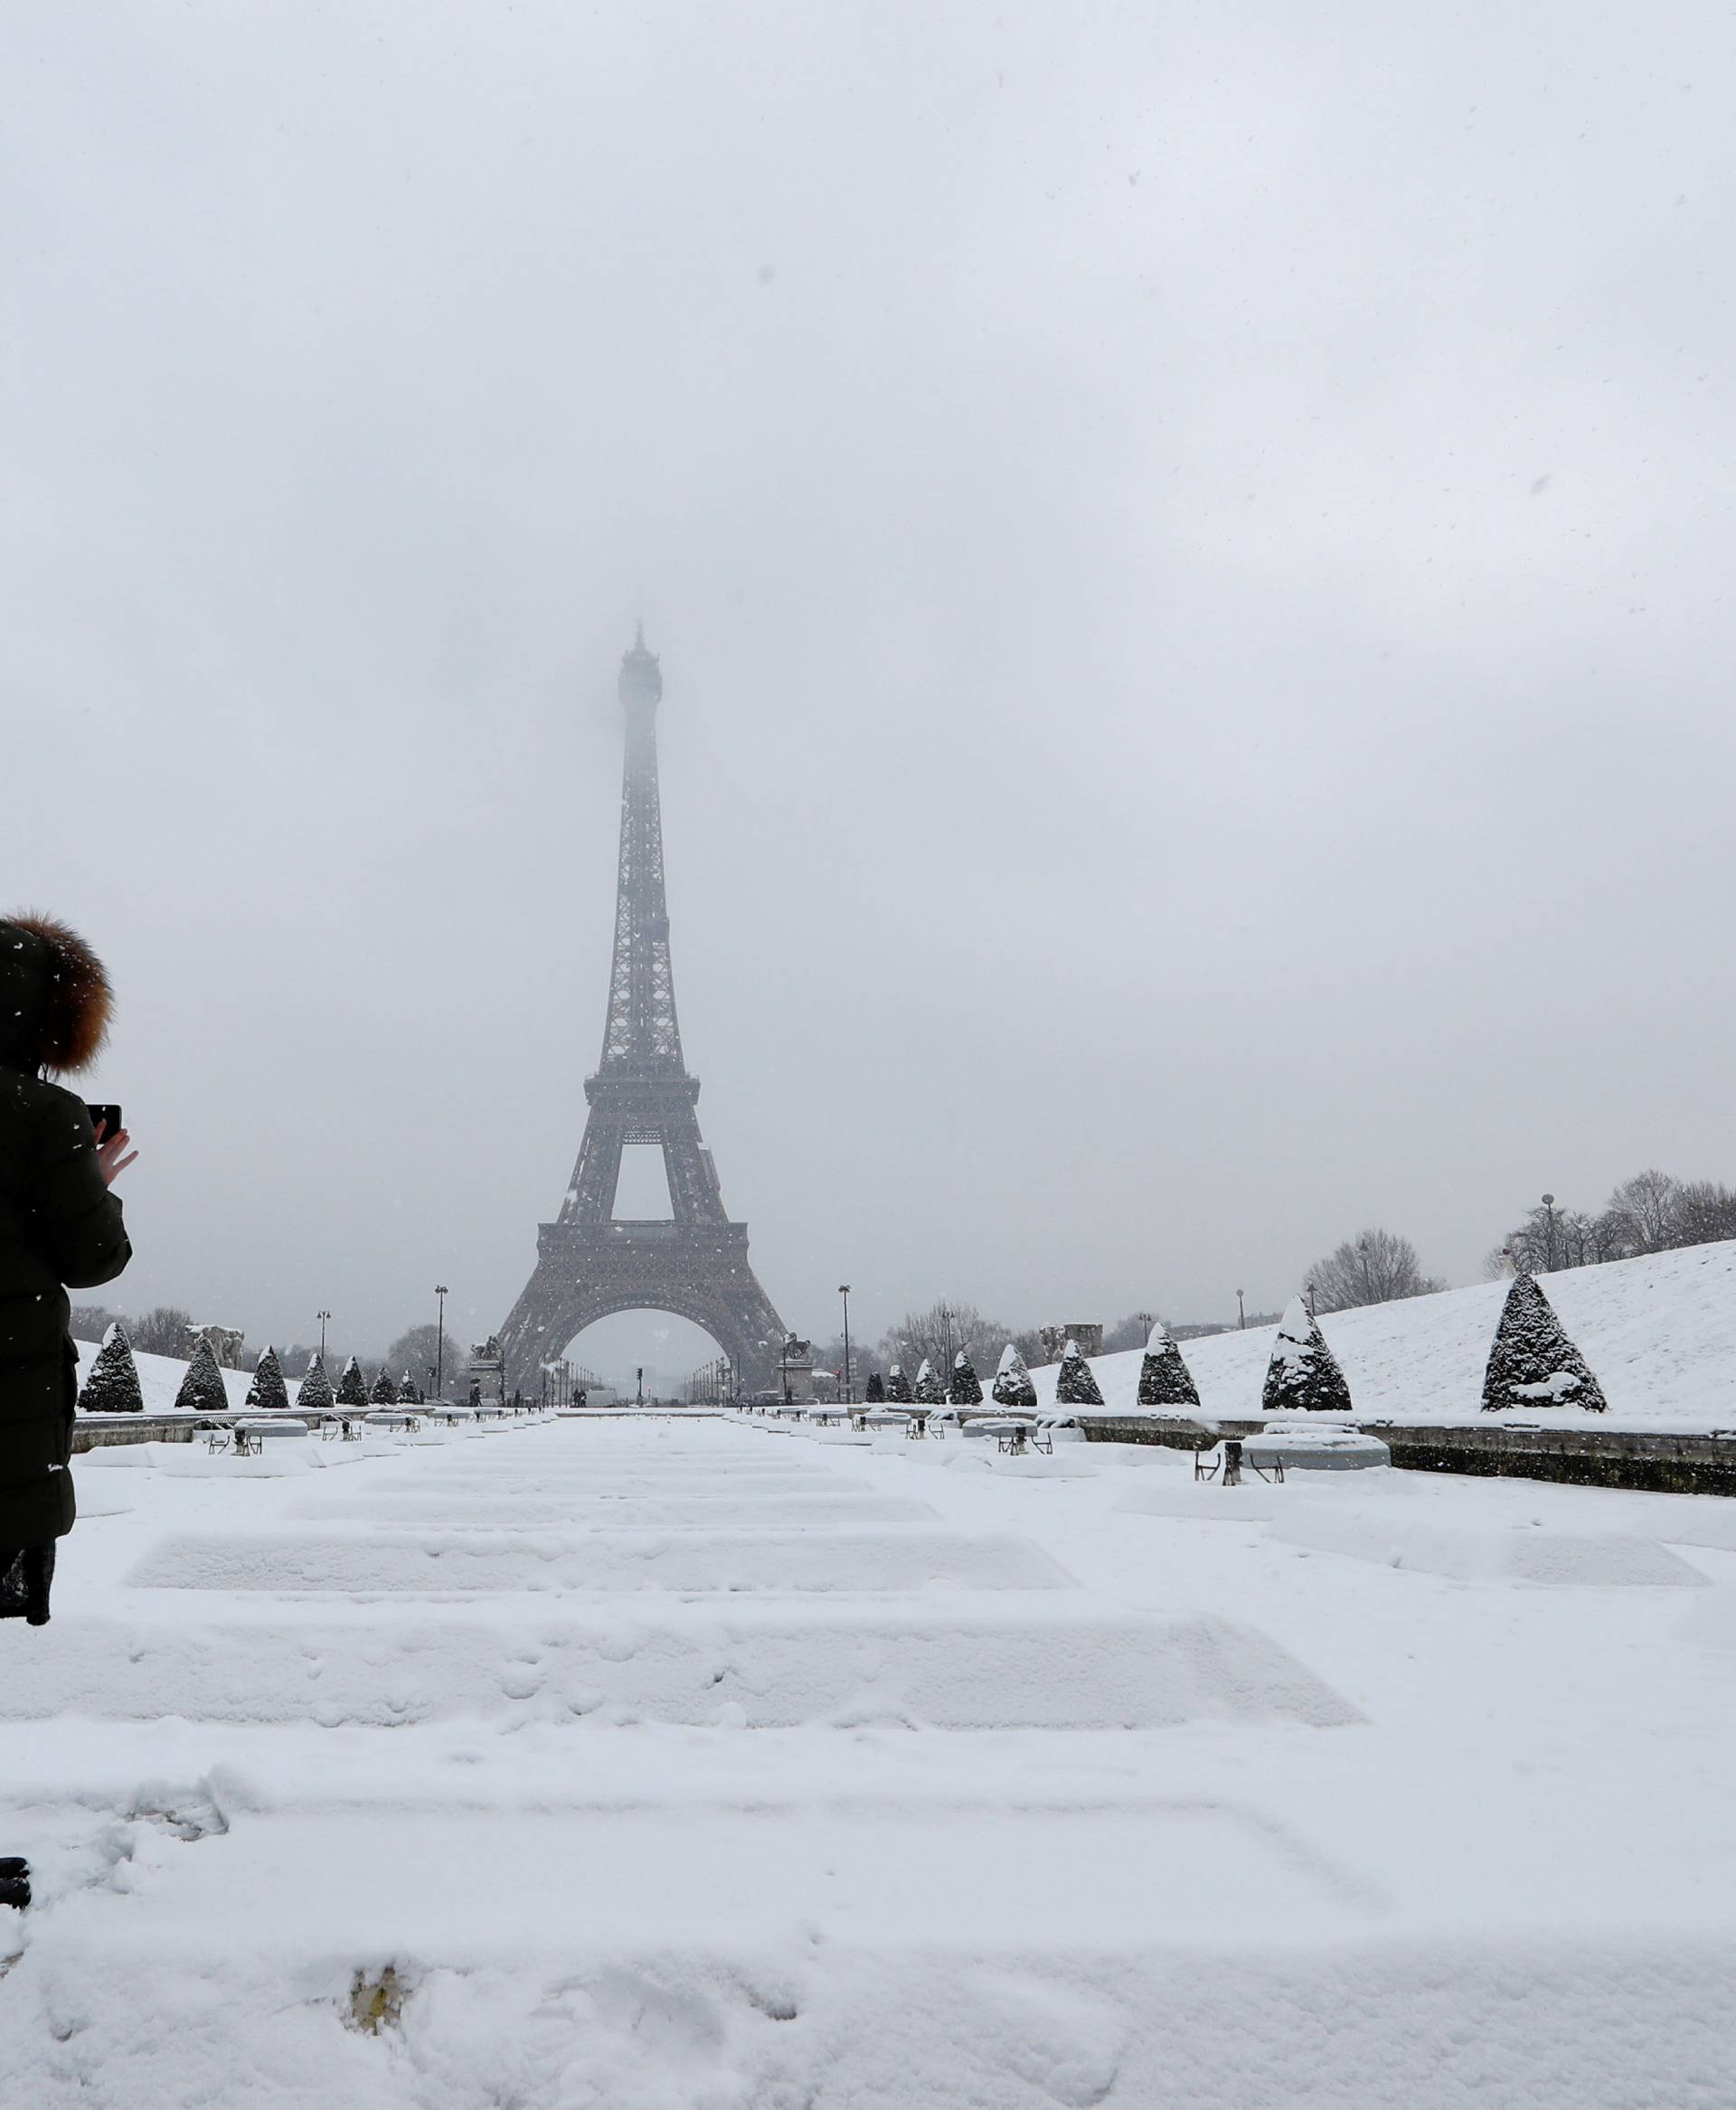 A woman takes pictures of the Eiffel Tower in Paris under the falling snow as winter weather continues in northern France